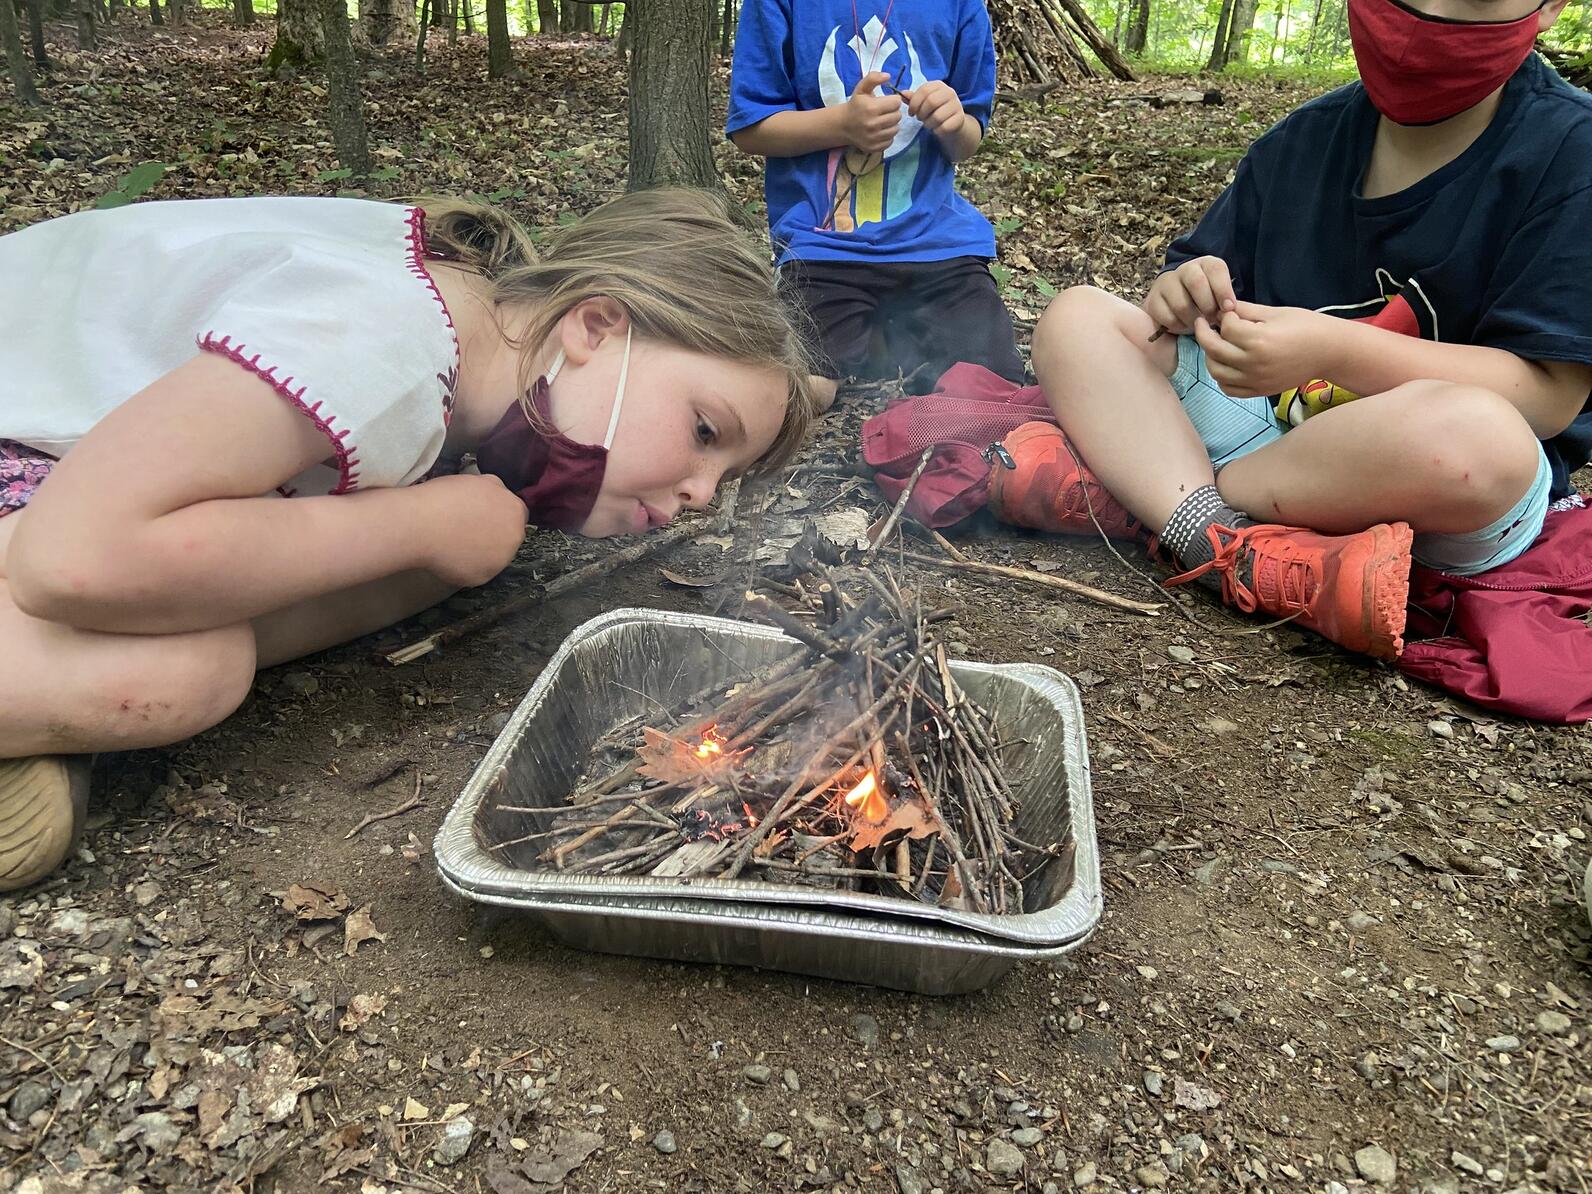 campers work together to keep a small stick fire burning. one camper pulls down their mask to blow on the flames while other look on.